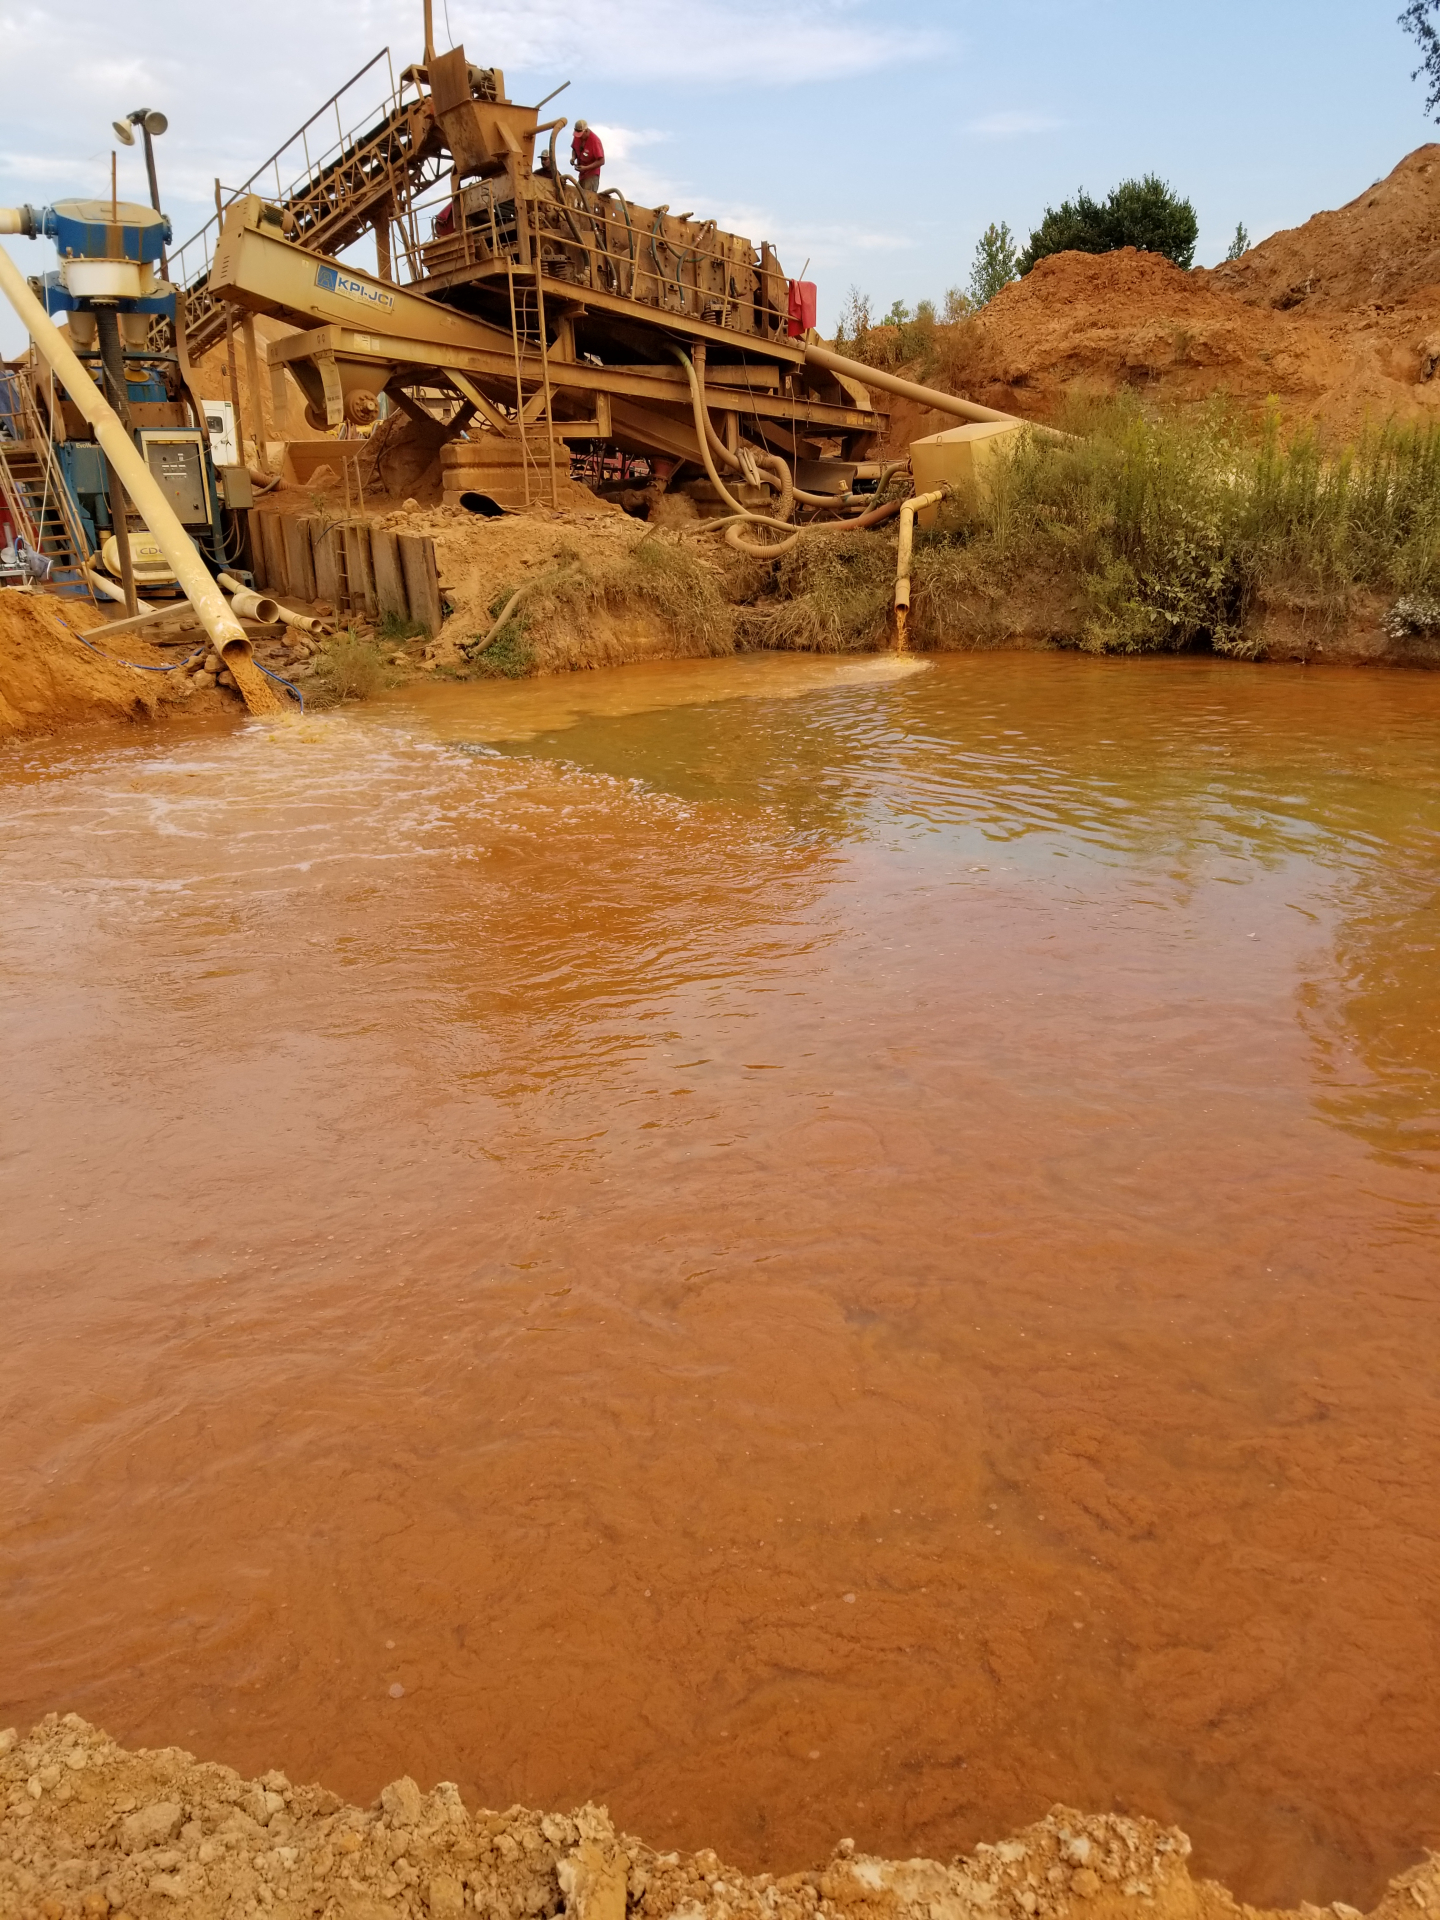 An industrial sand washing plant discharges reddish slurry into a settling pond where the solids are dosed with a polymer solution to create flocculation and sedimentation of the solids.